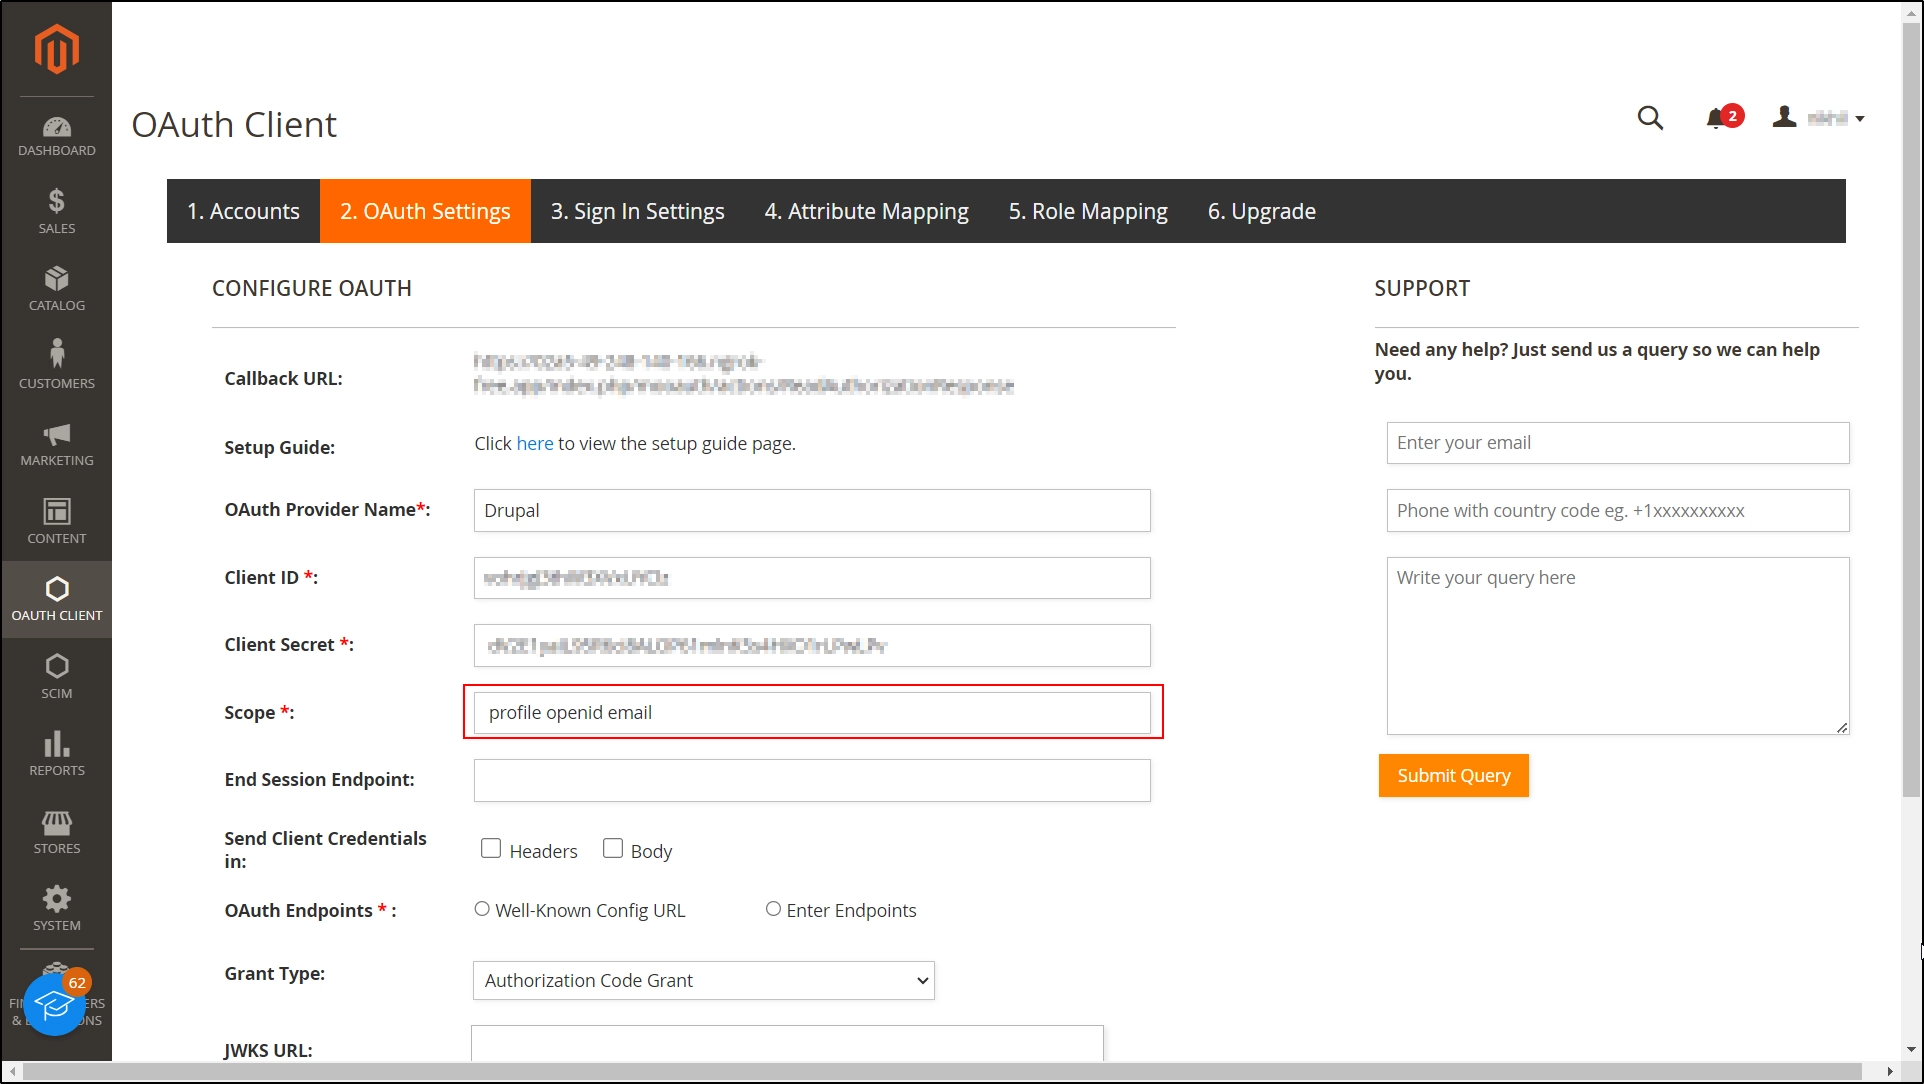 Drupal Magento OAuth/OIDC Provider - Paste the copied Scope value in magento Scope text field